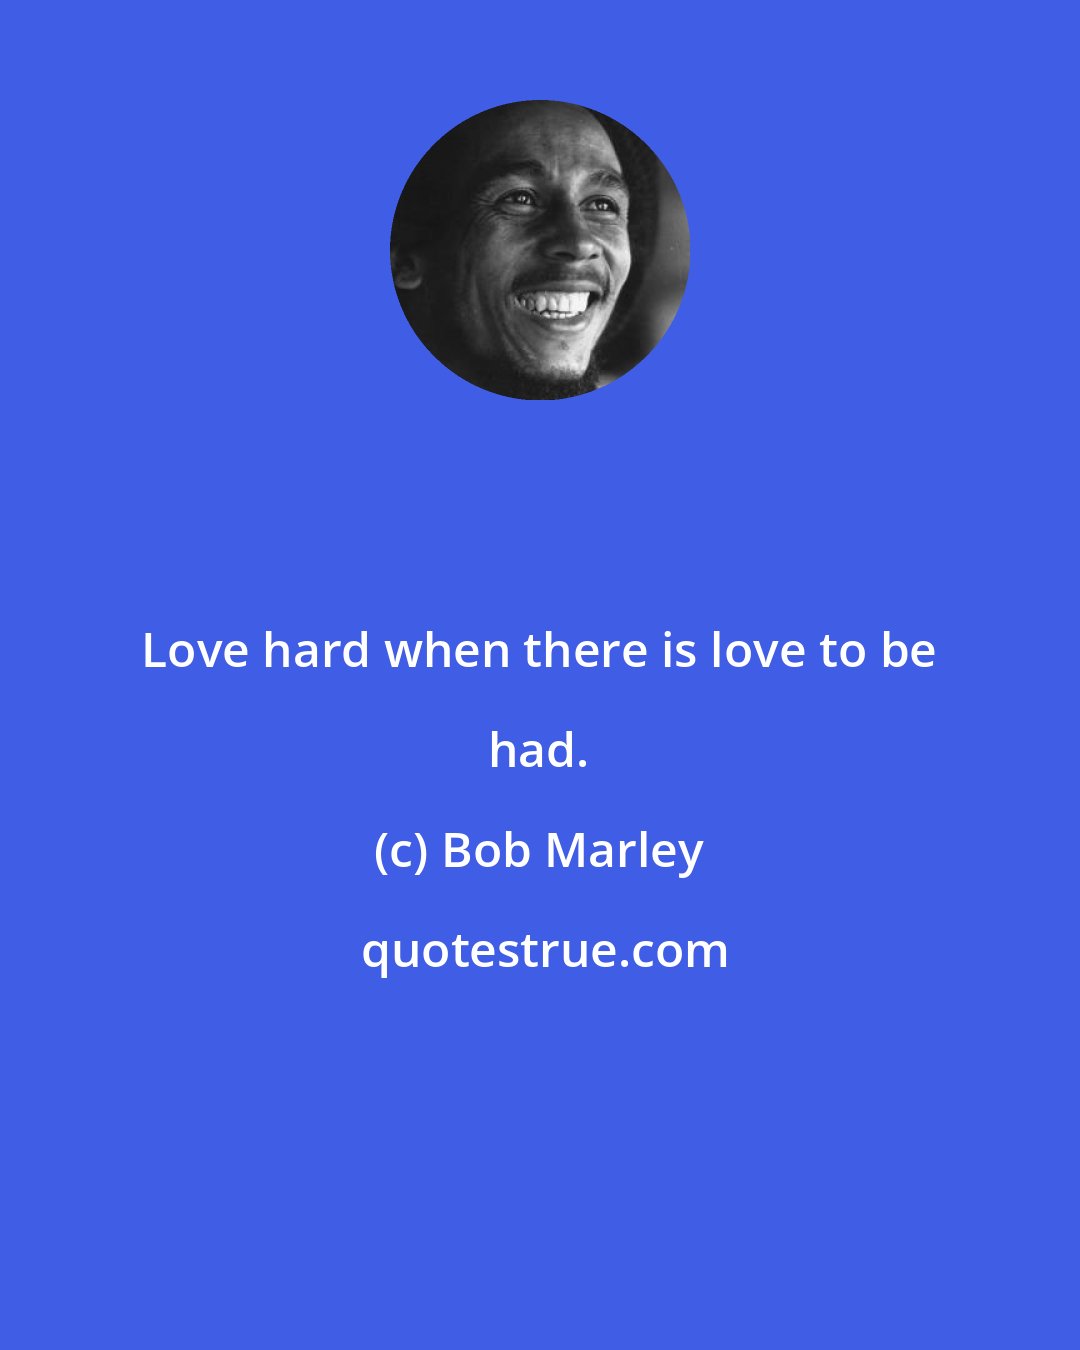 Bob Marley: Love hard when there is love to be had.